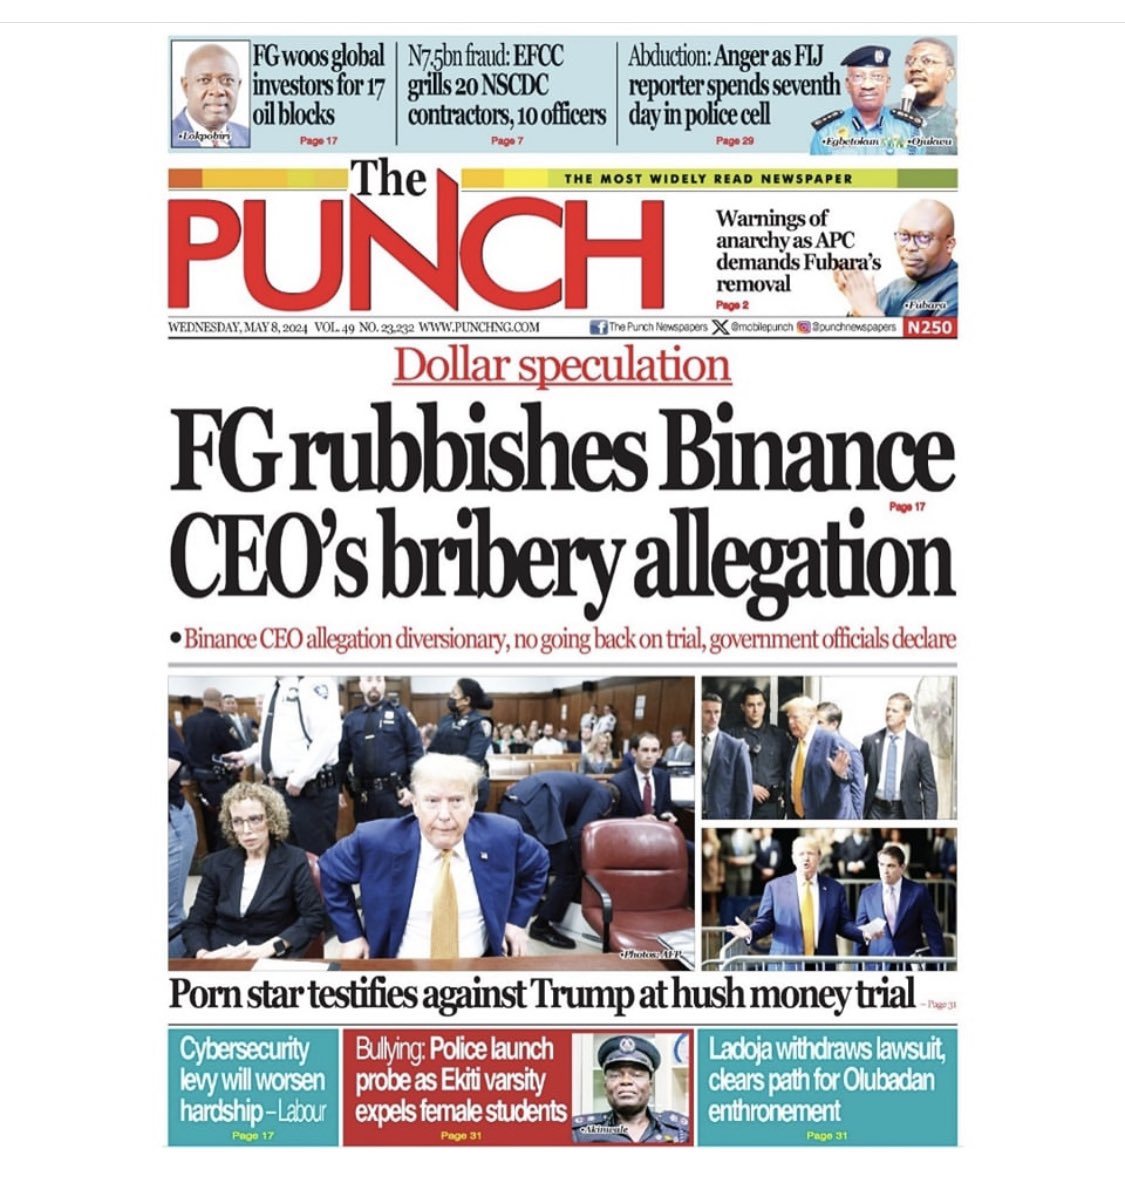 IN THE NEWS TODAY!
Wednesday, 8th May, 2024.

#nigeriannews 
#headlinestoday 
#newspaperreview 
#pressreview 
#naijanews 
#frontpage 
#currentaffairs 
#mediawatch 
#dailynews 
#newsupdates 
#mediacoverage 
#topstories 
#breakingnews 
#nigeriatoday